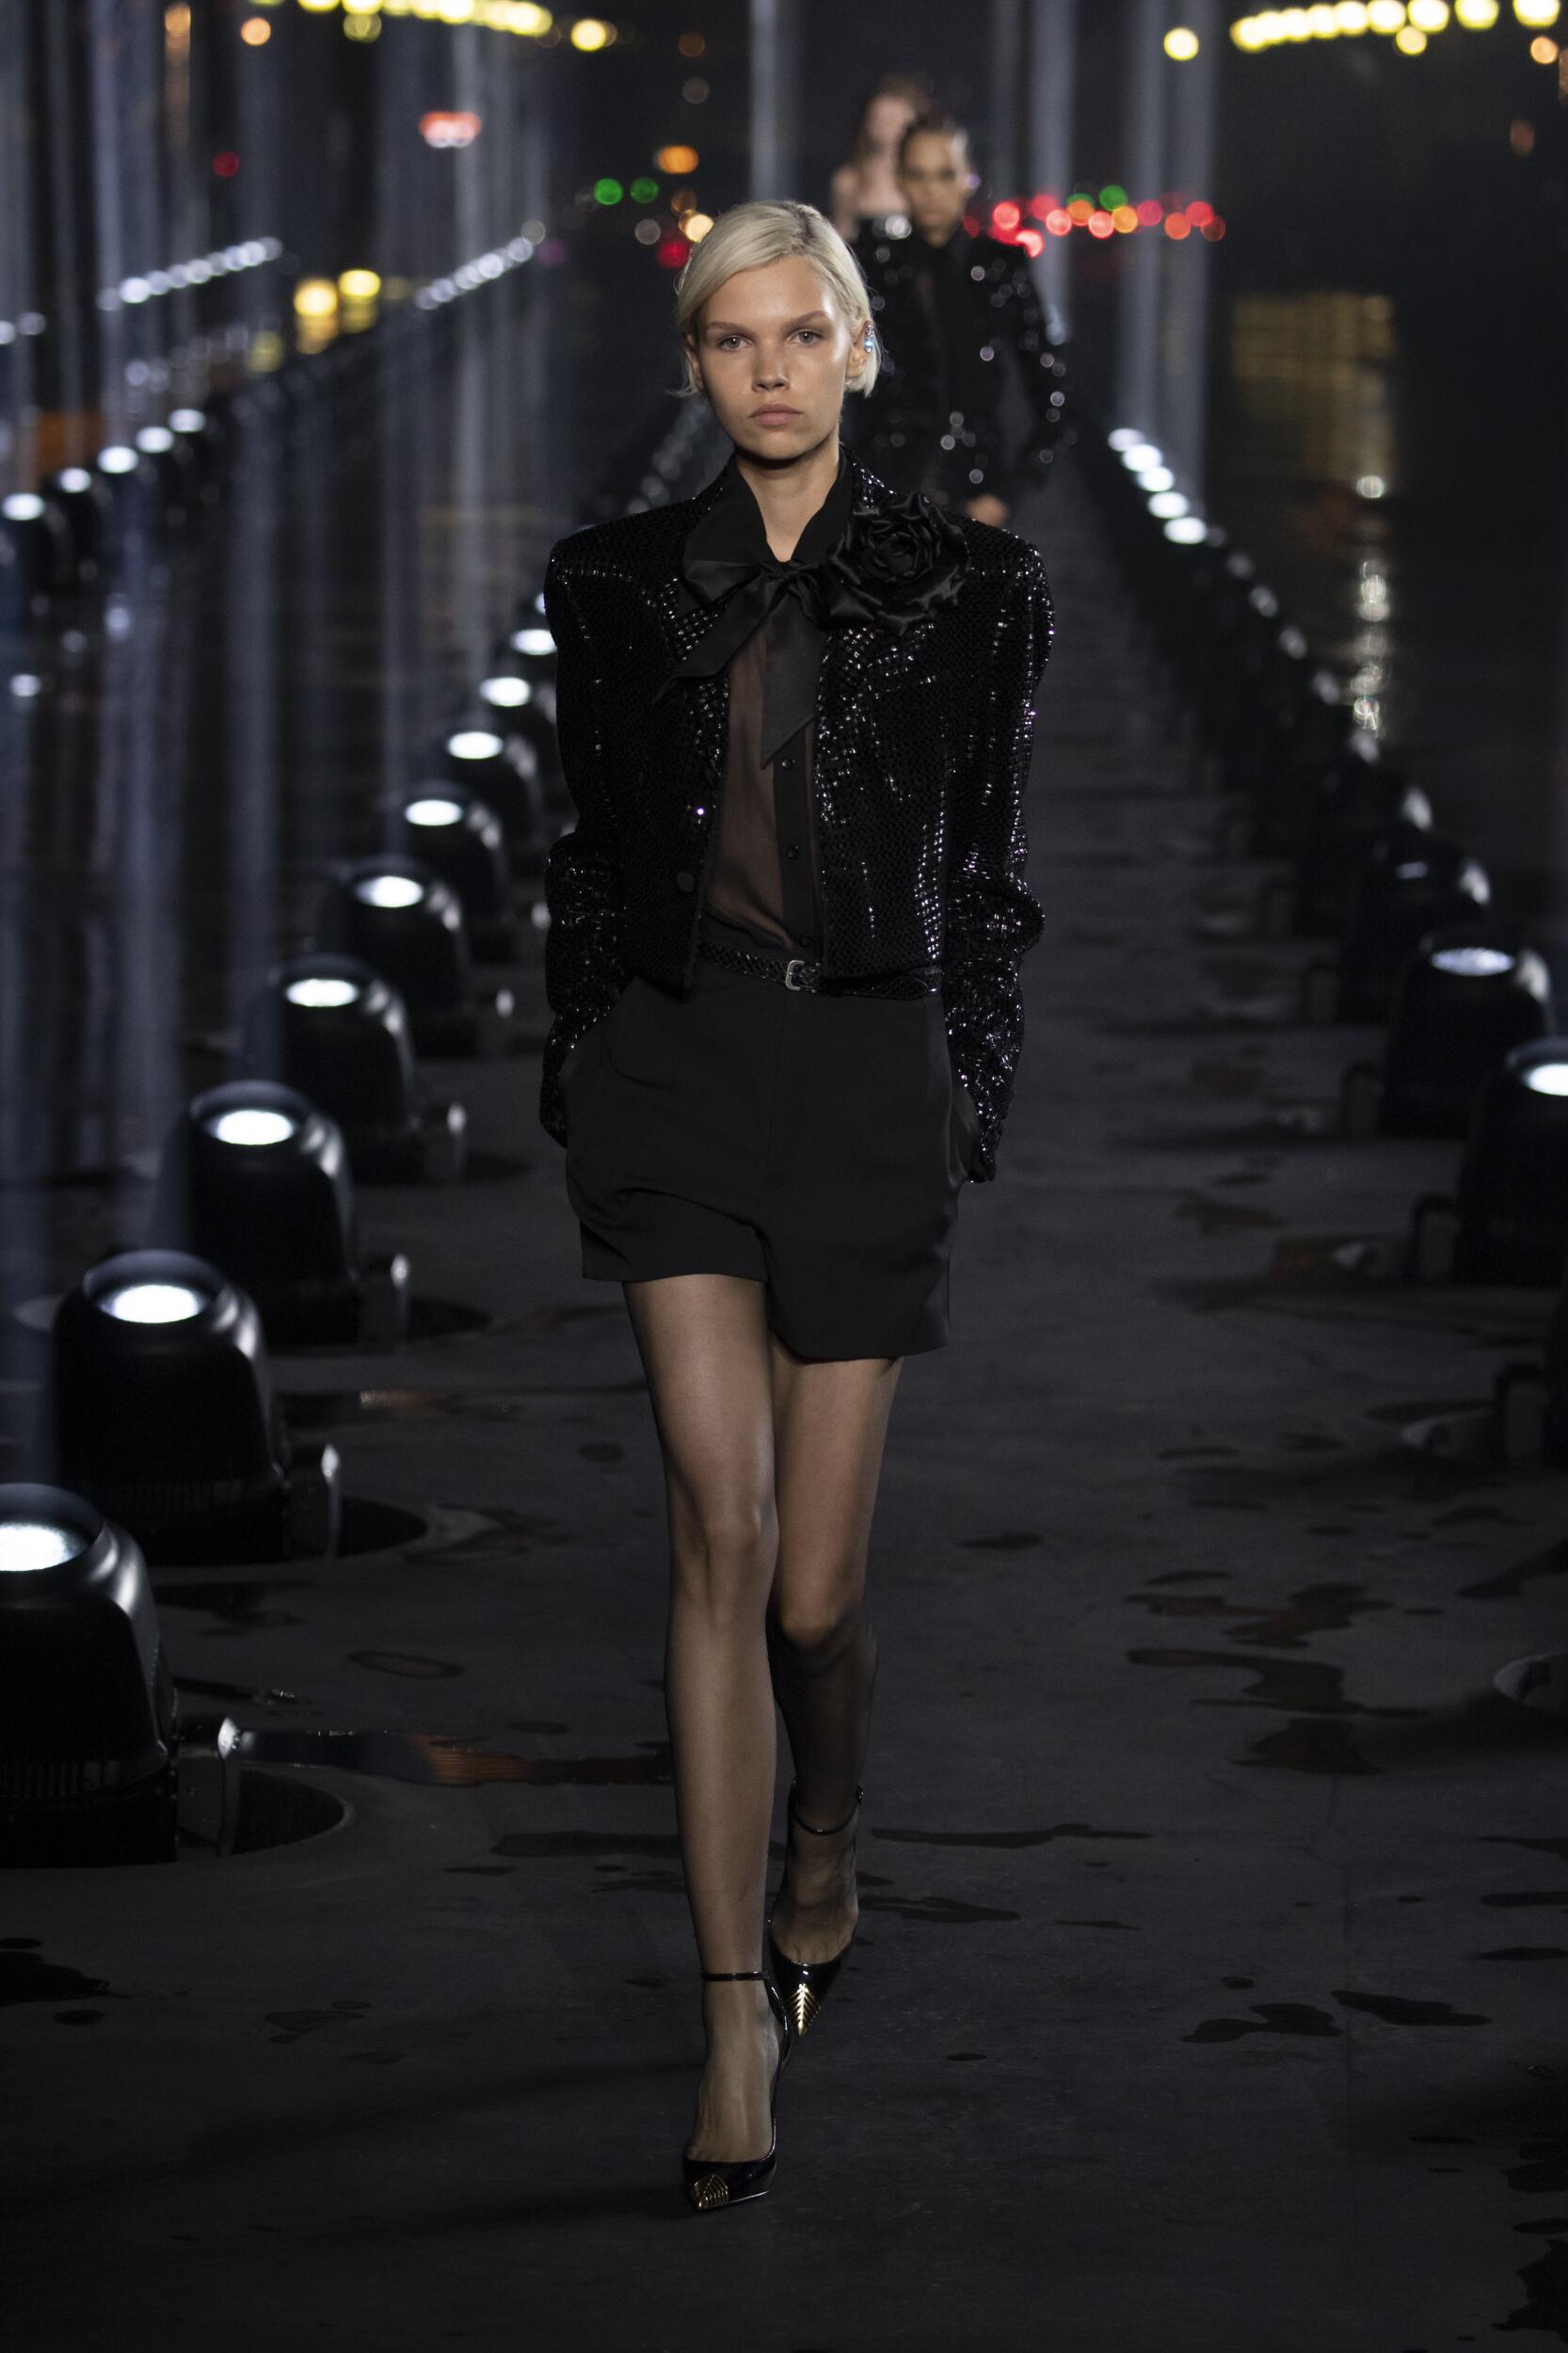 Saint Laurent Womenswear Collection Style